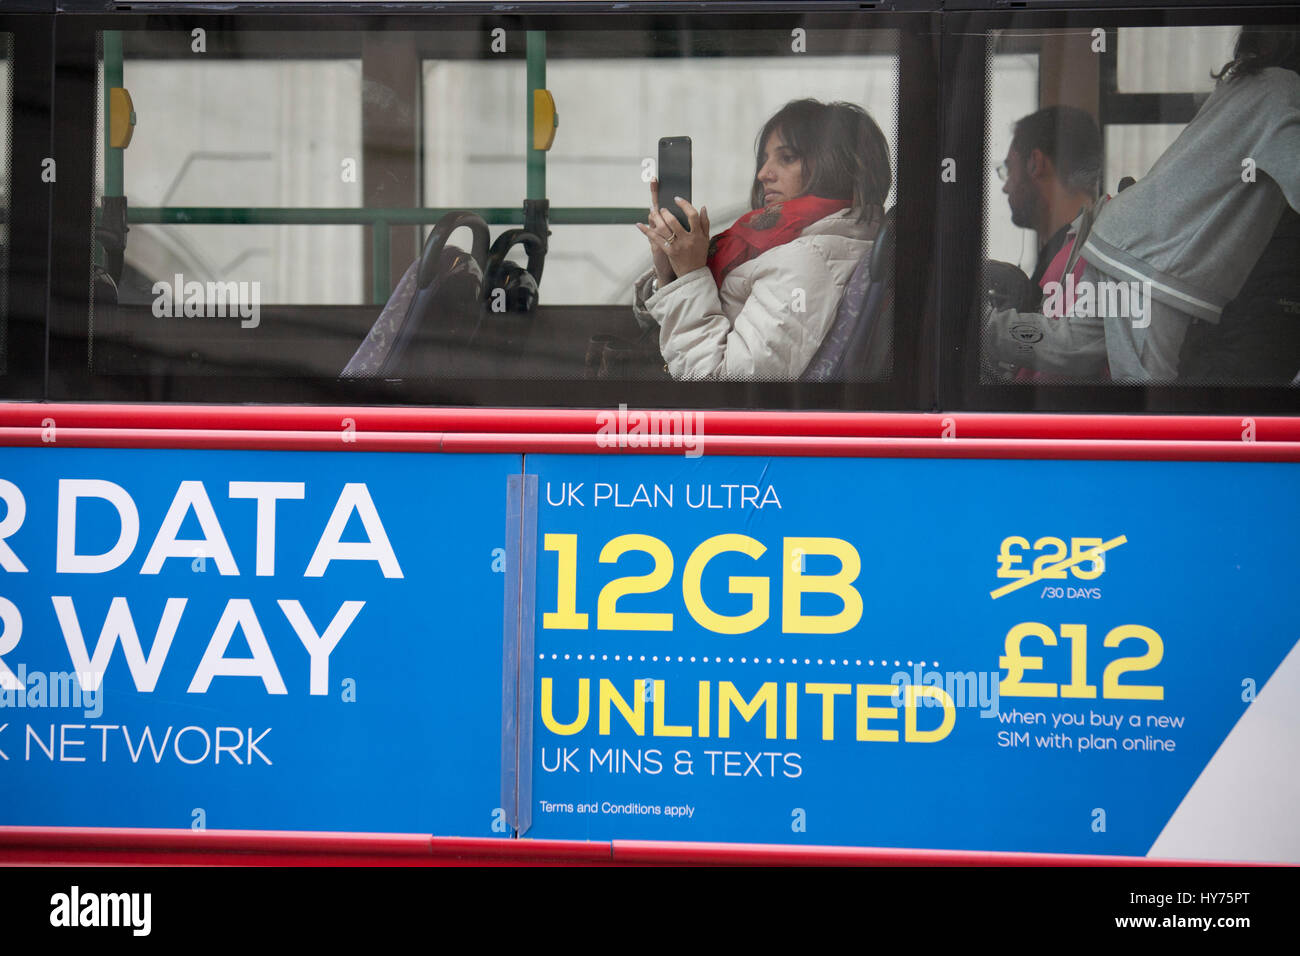 Female looking at mobile phone on top deck of bus, with advert for mobile phone data on side of bus Stock Photo